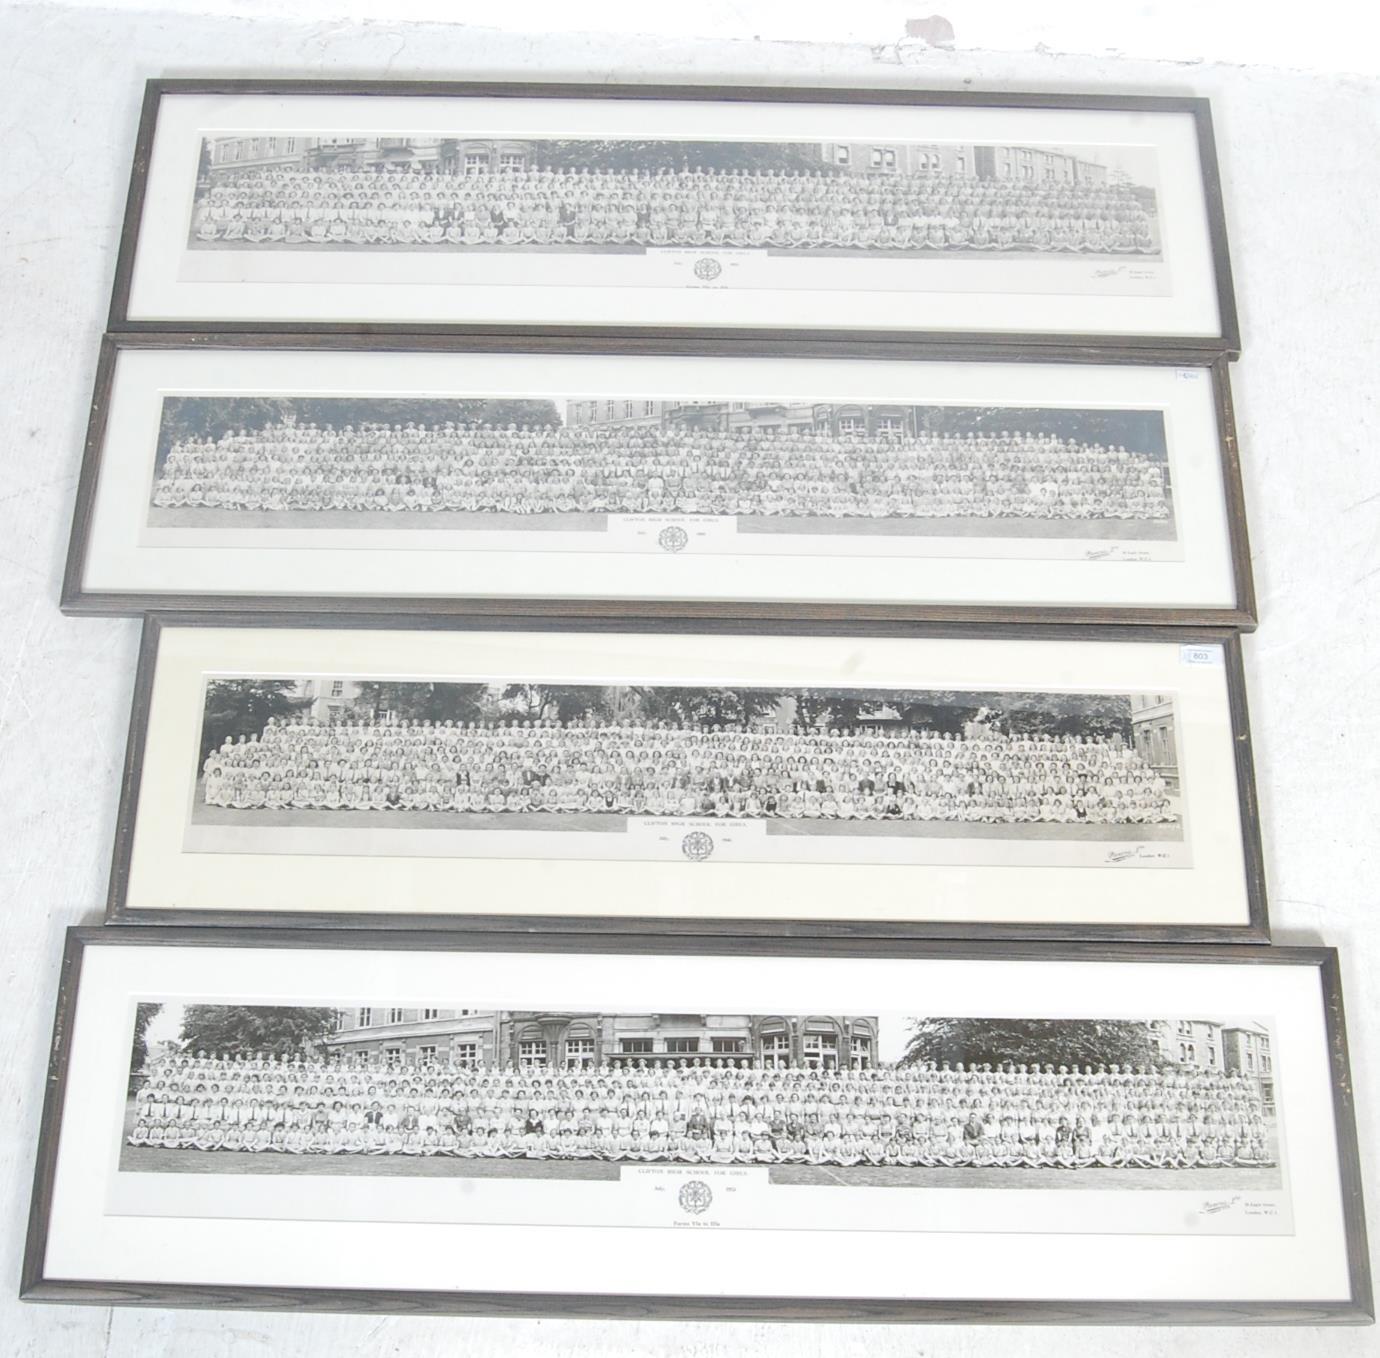 COOLECTION OF FOUR SCHOOL PHOTGRAPHS OF CLIFTON HIGH SCHOOL FOR GIRLS